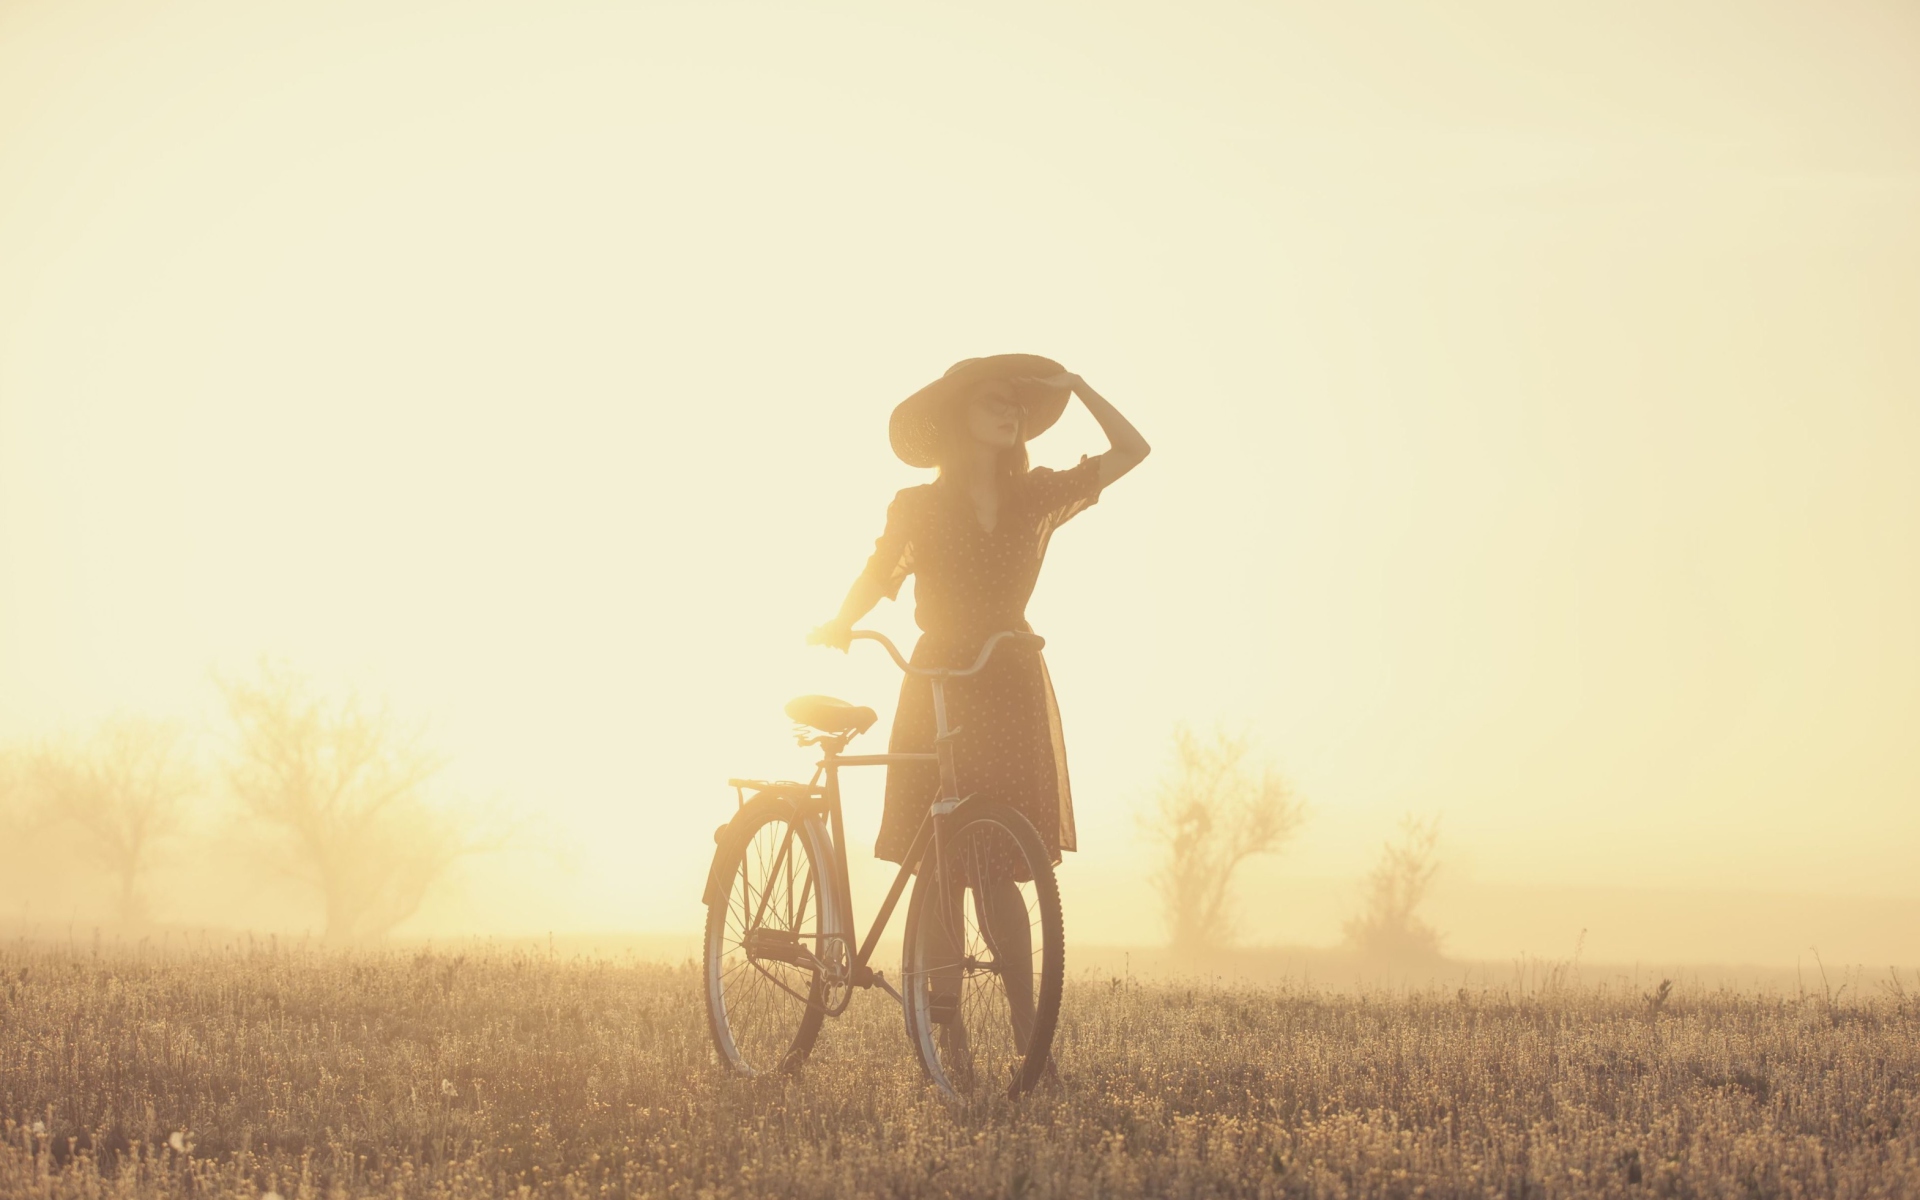 Das Girl And Bicycle On Misty Day Wallpaper 1920x1200